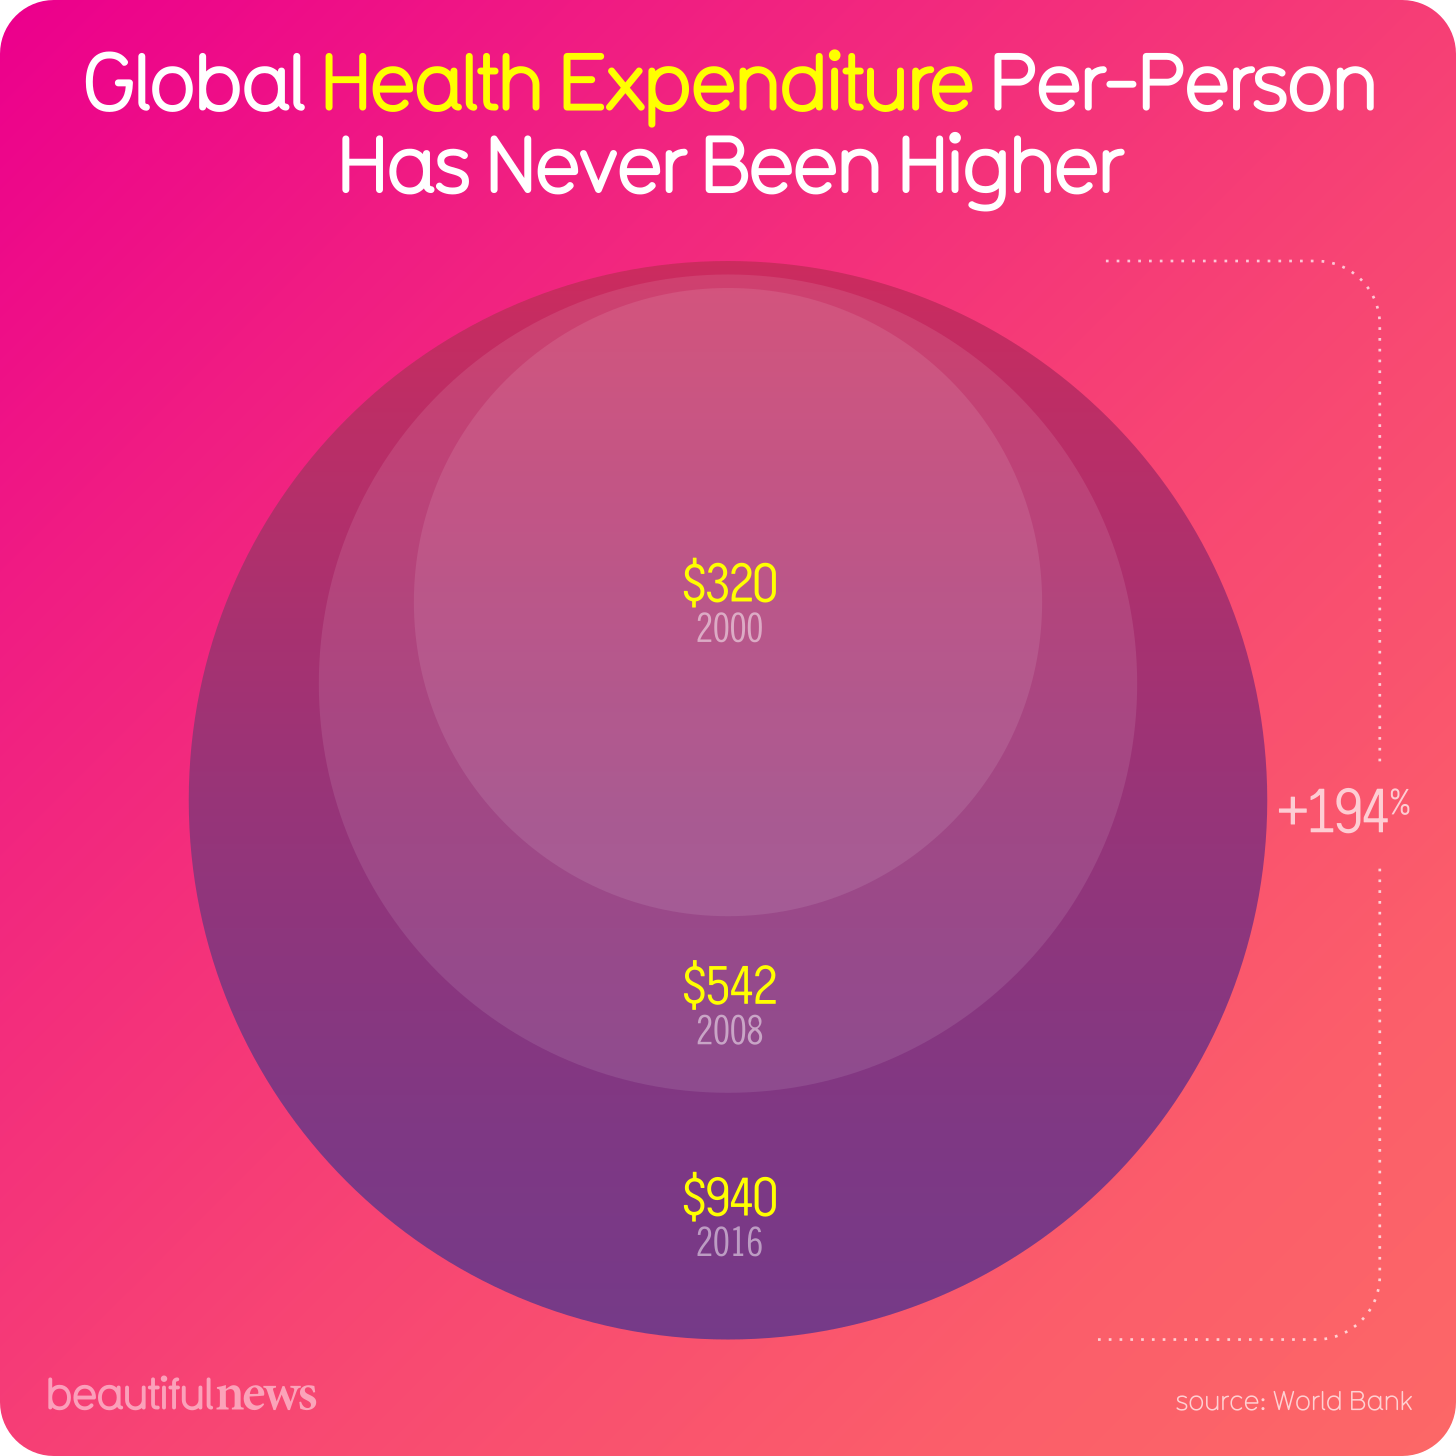 Global Health Expenditure Per-Person Has Never Been Higher